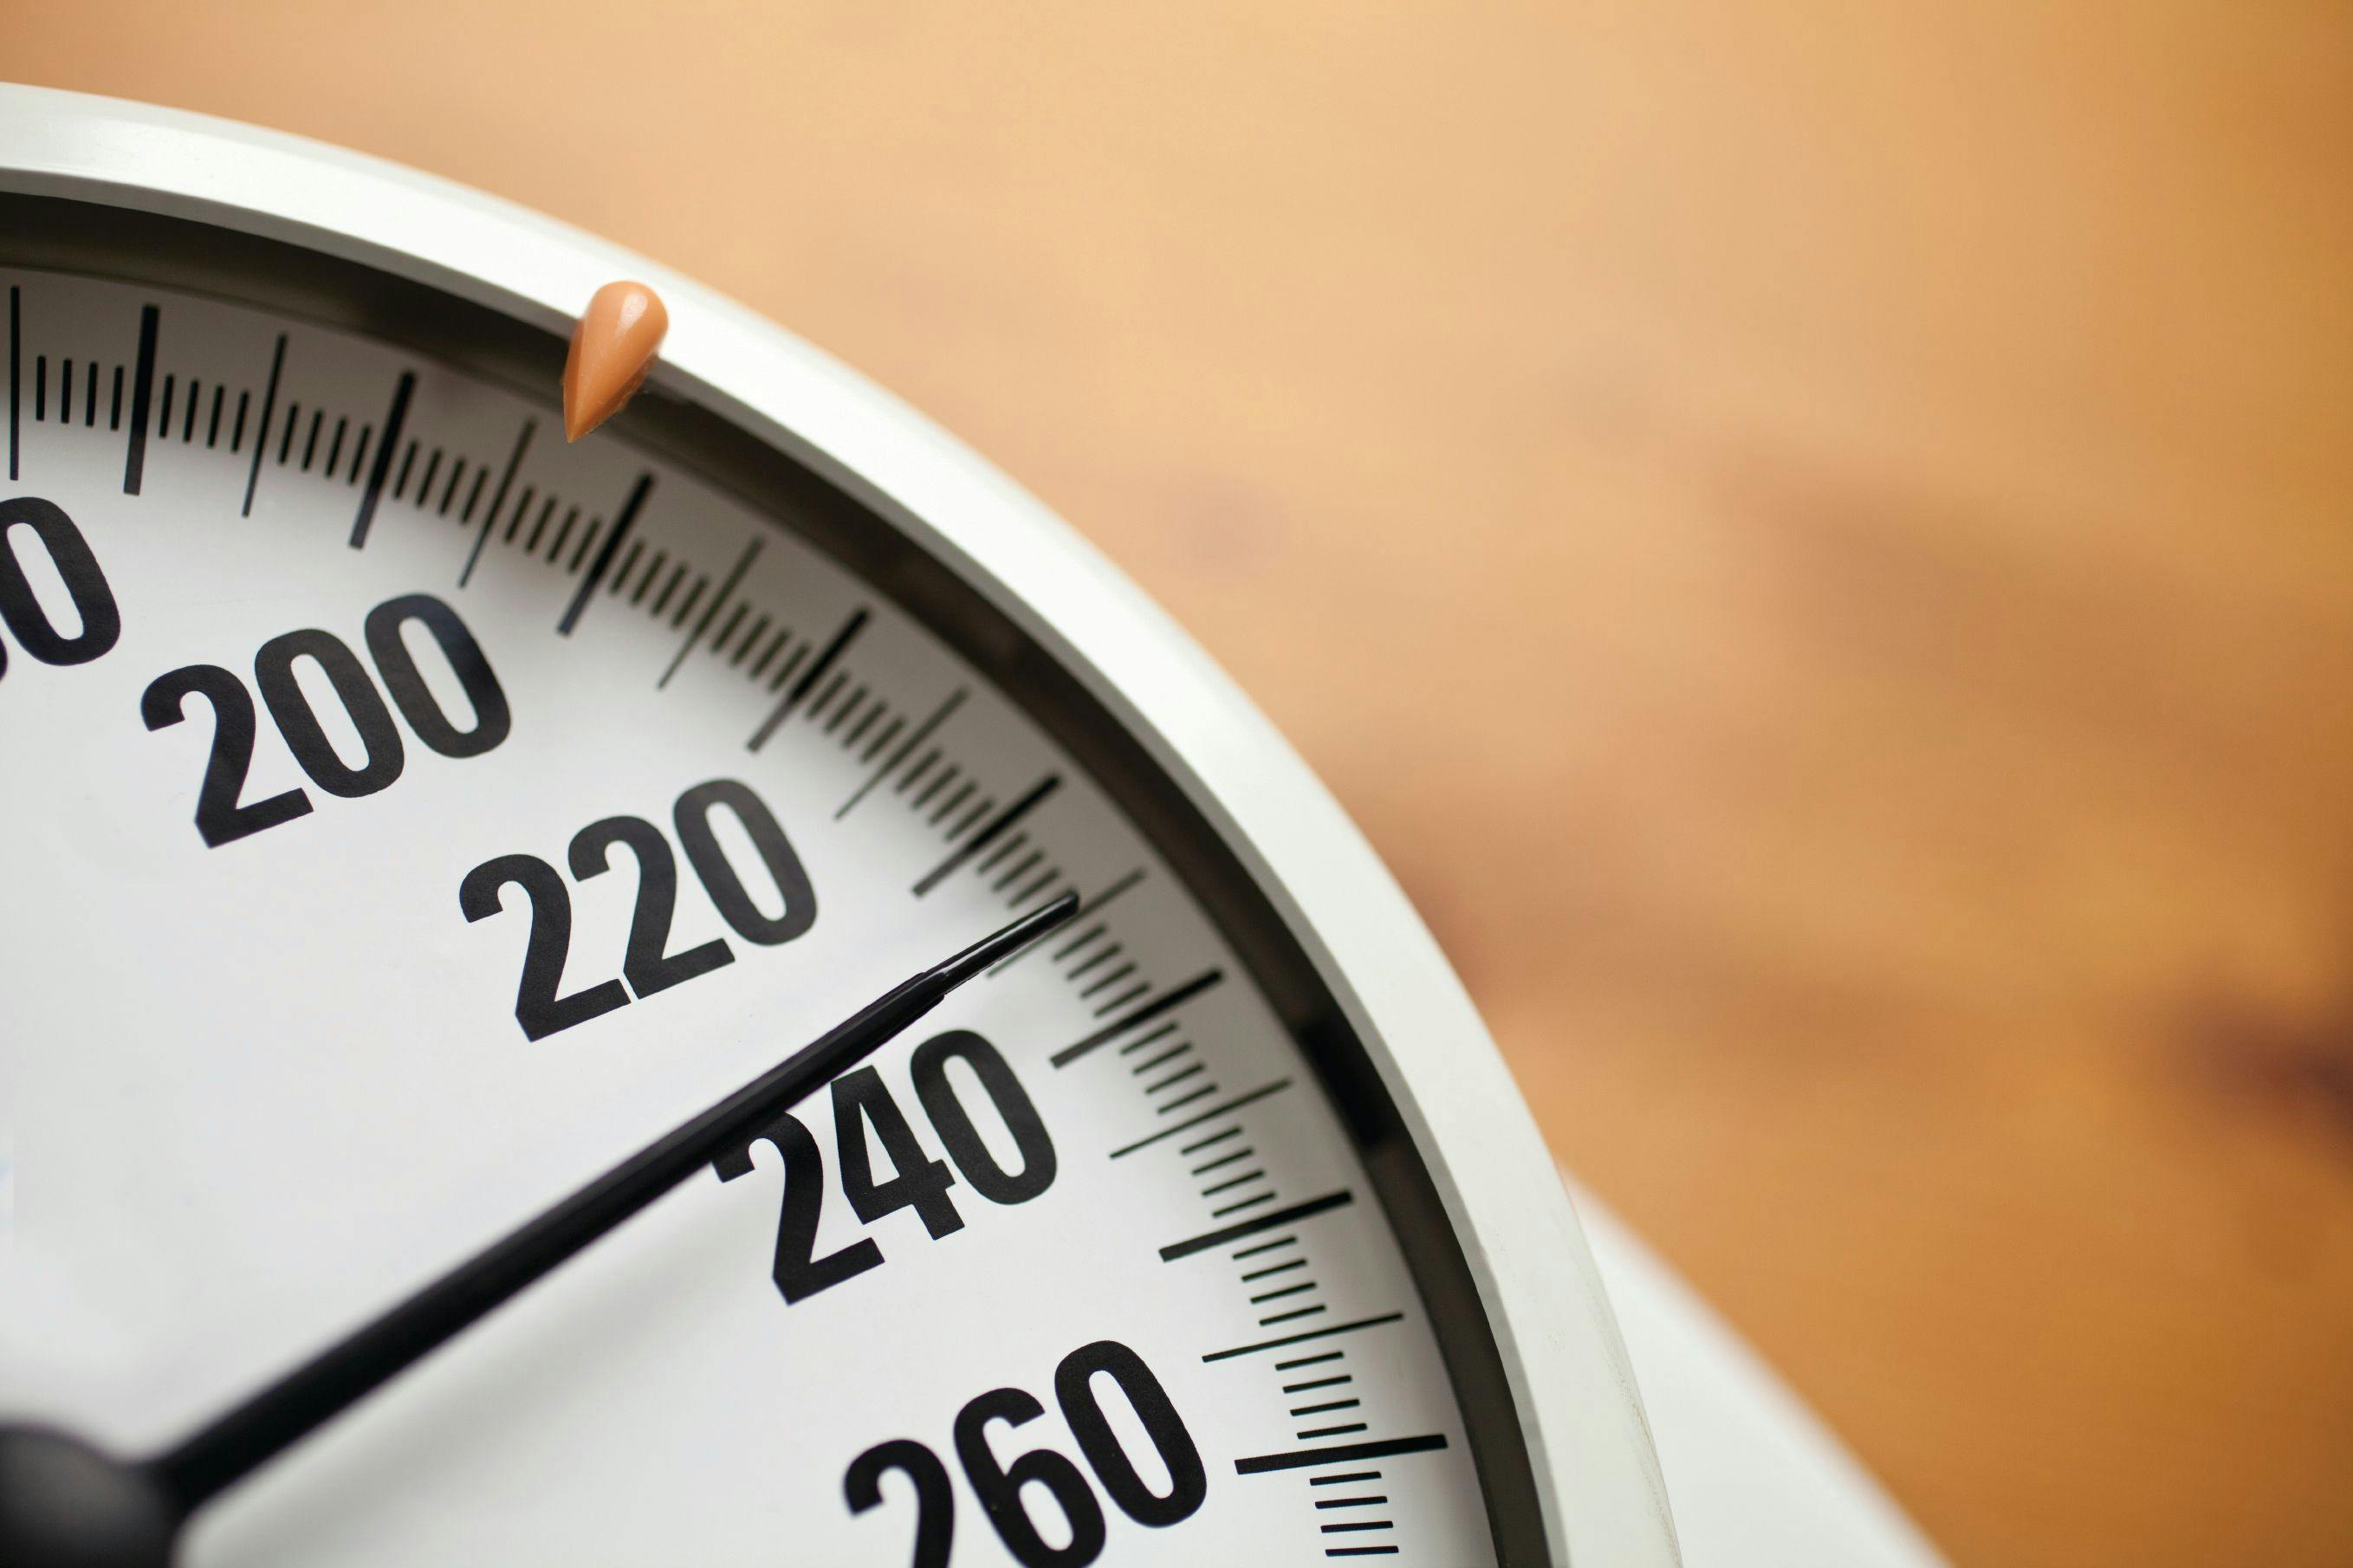 Major Weight Loss Could Return Cardiovascular Risk to Normal Levels in Patients with Obesity